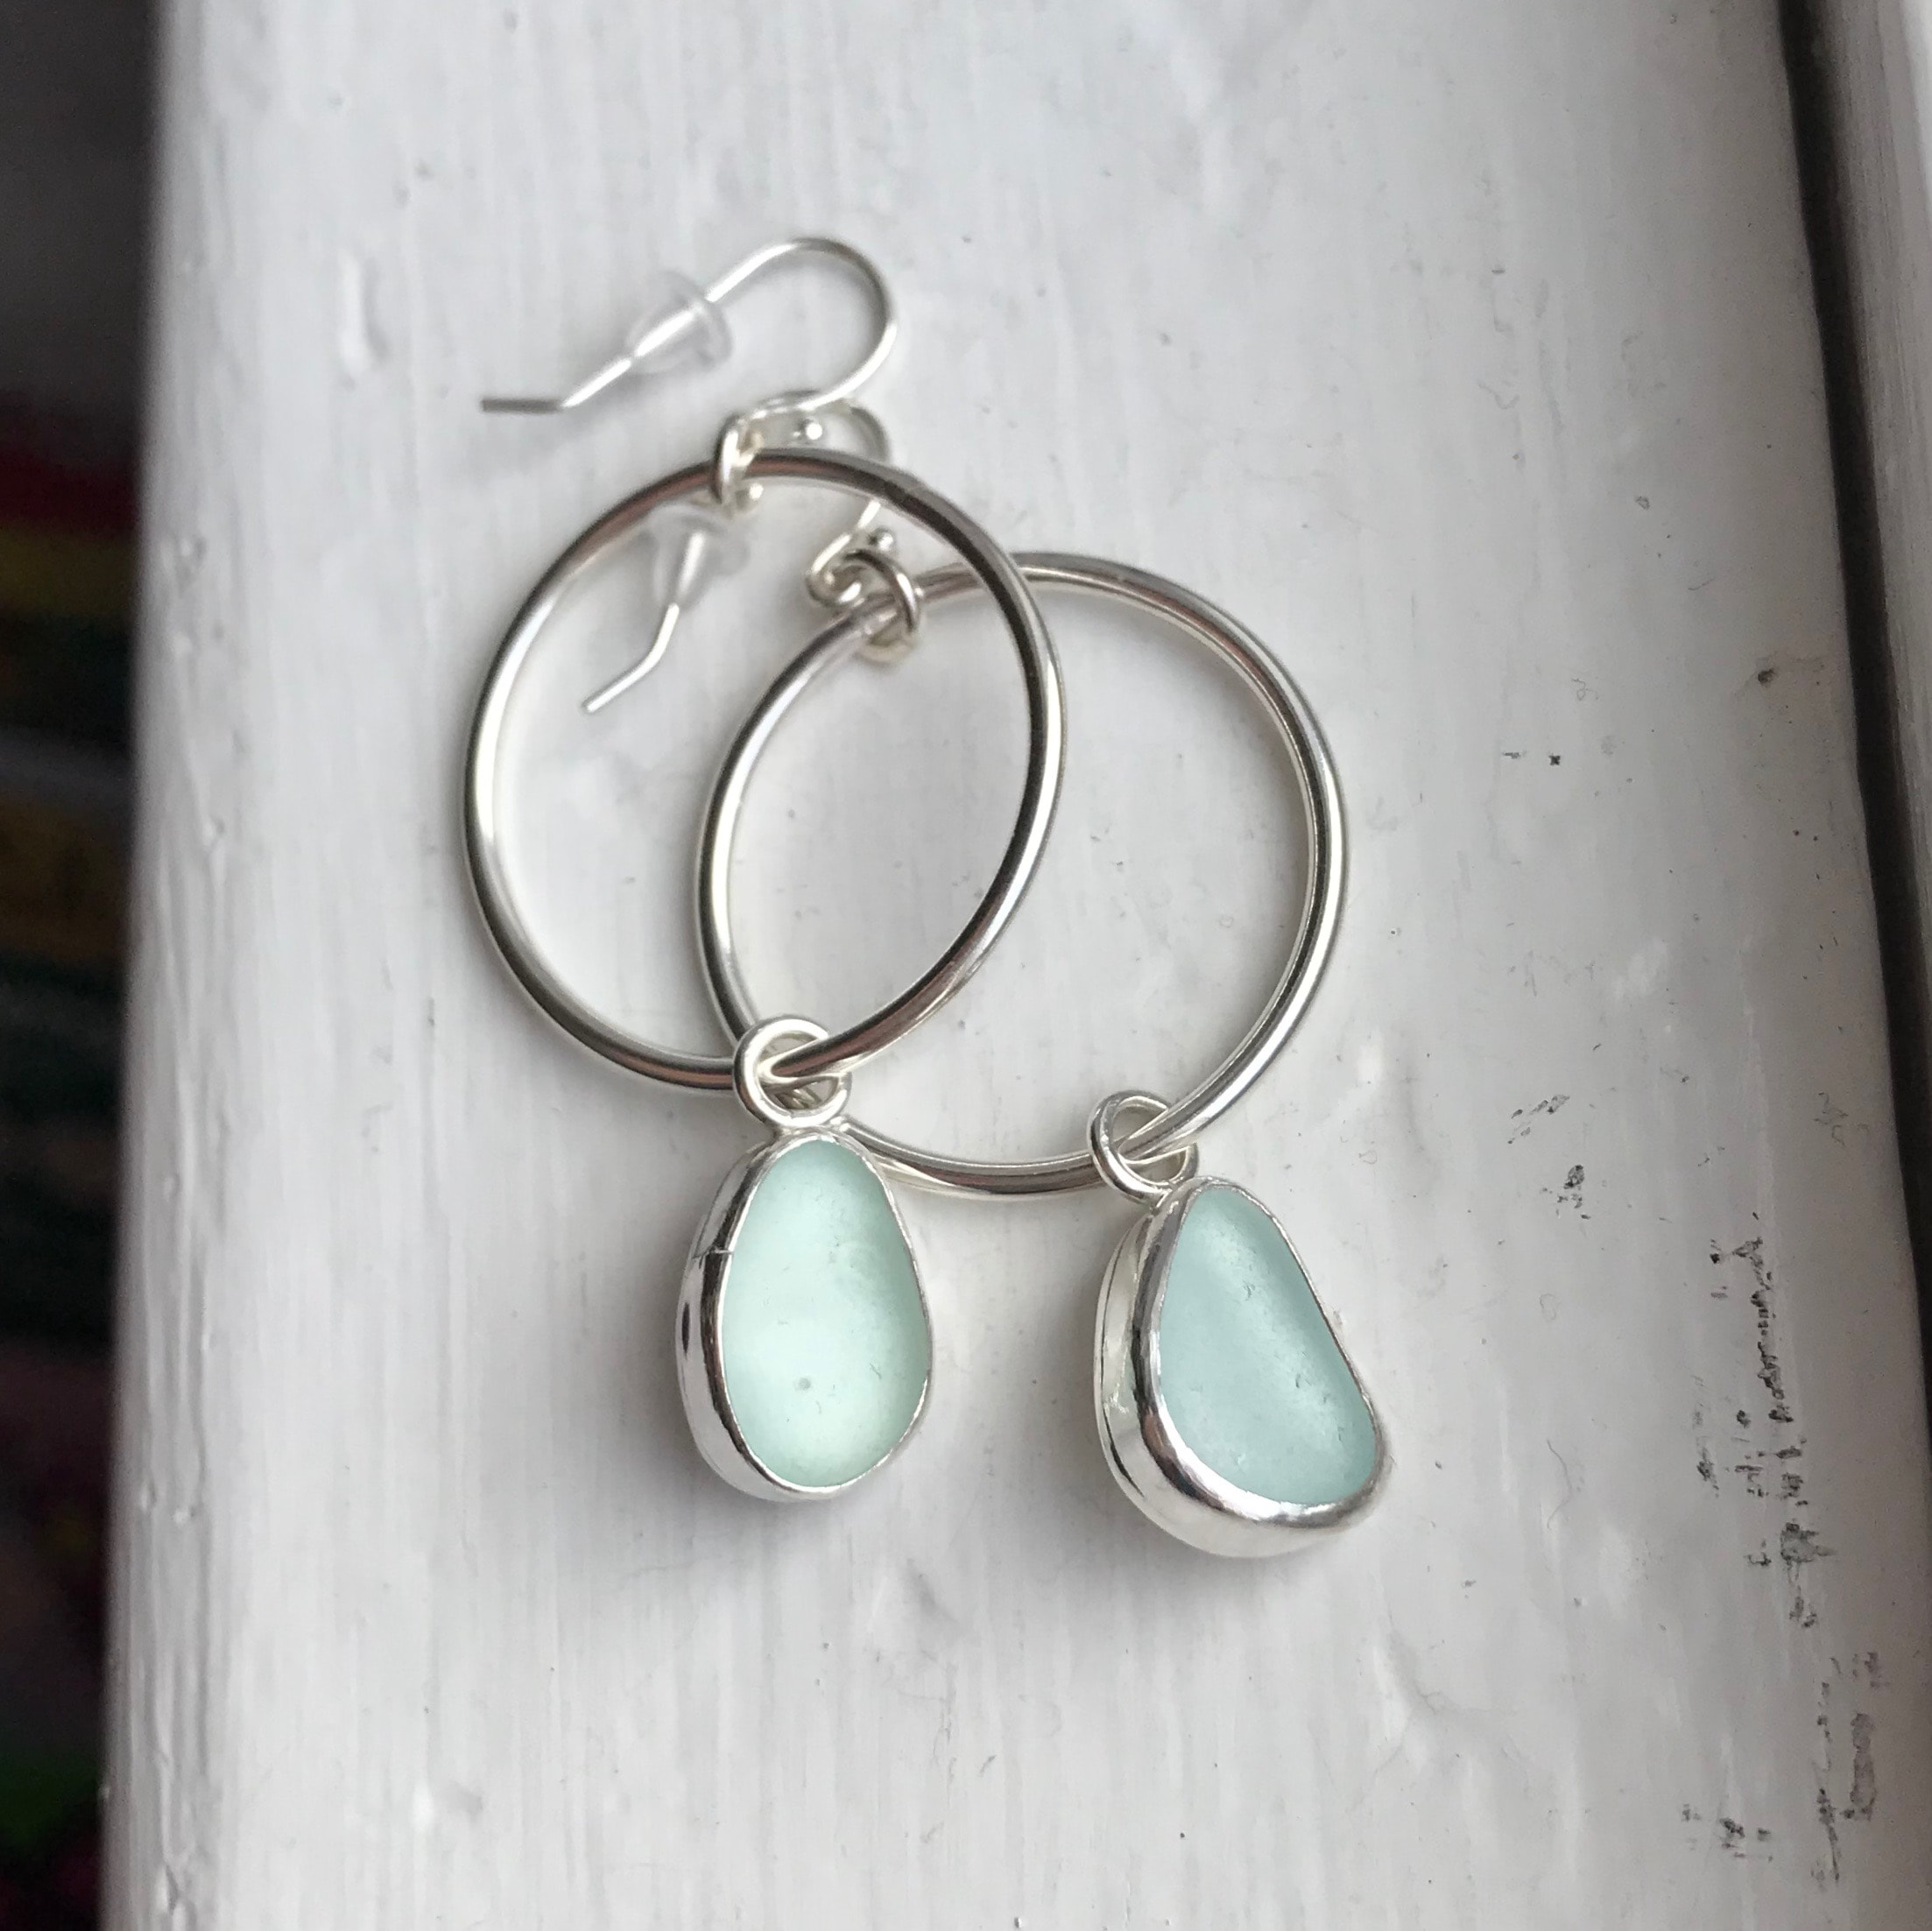 PENDANT OR RING $45 3 PC ANY COLOR BEACH RECYCLED SEA GLASS CUFF EARRING